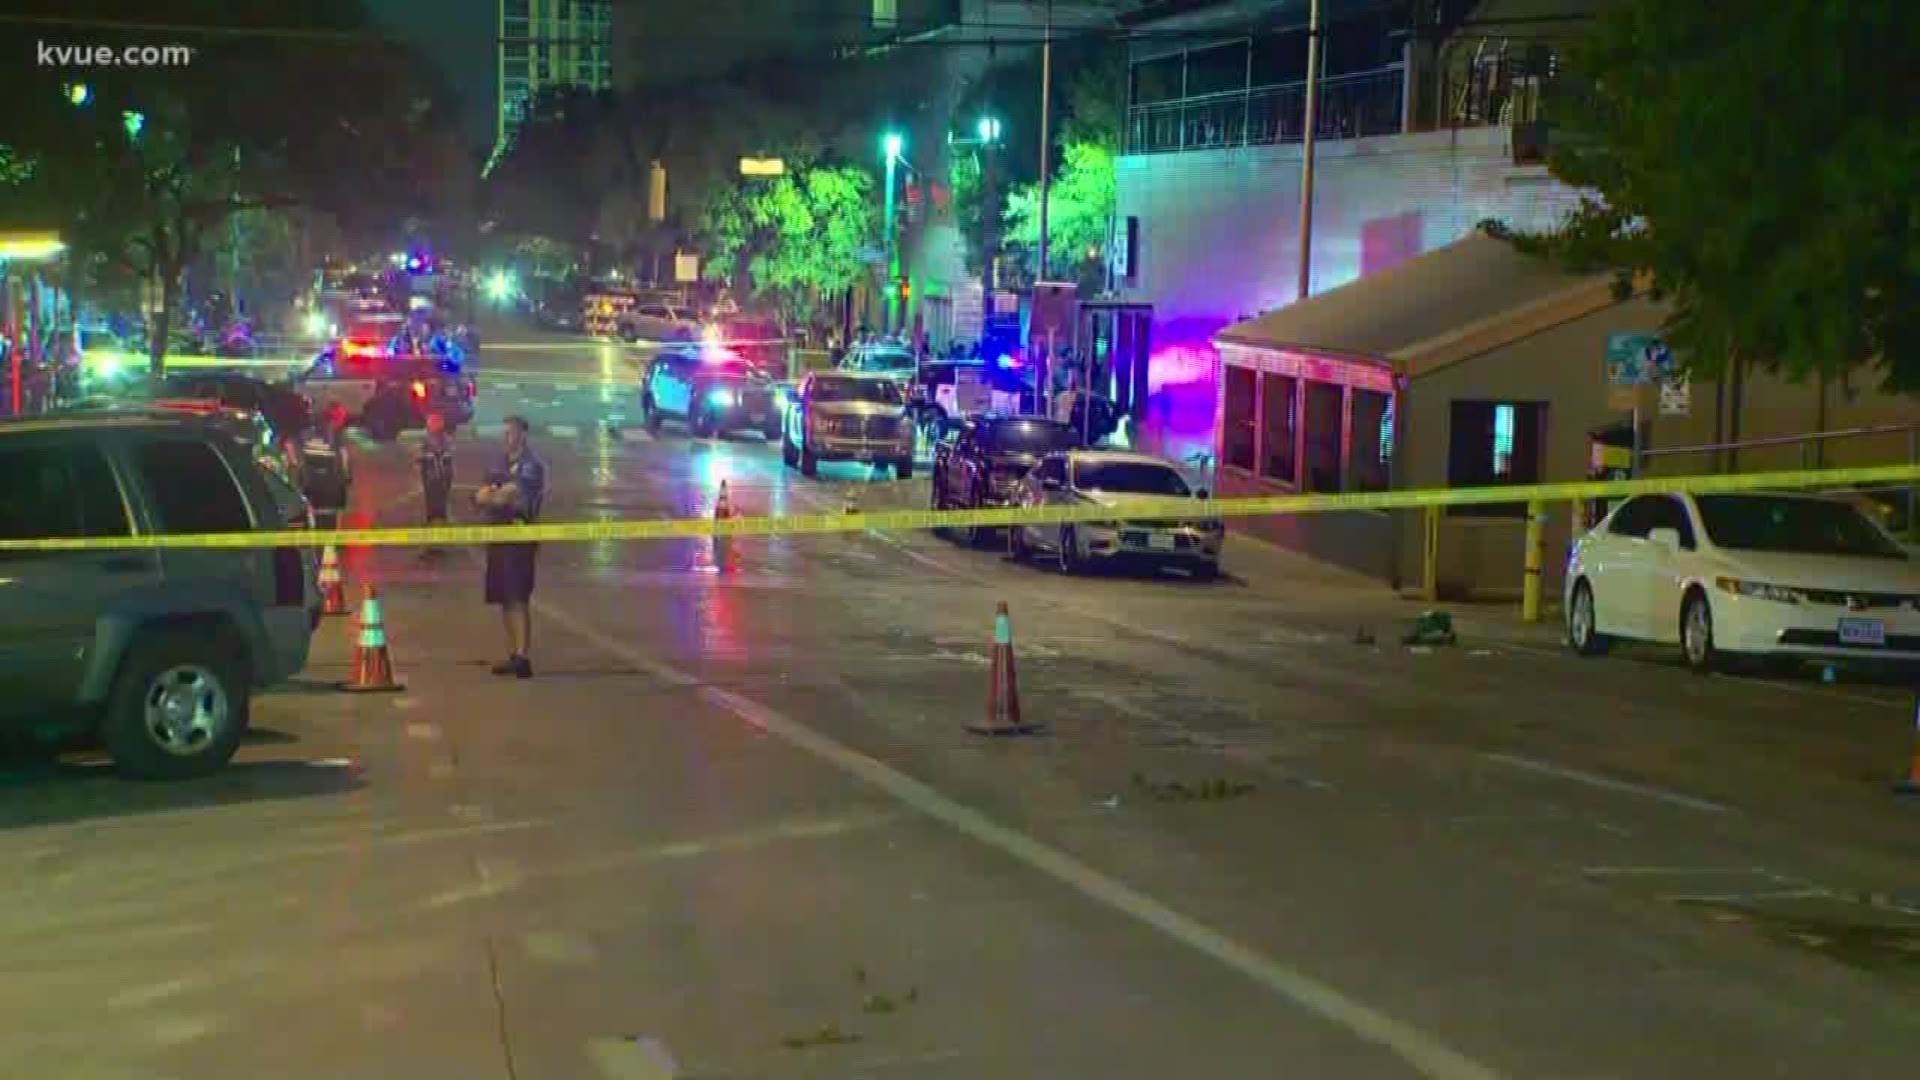 Austin police identified the man killed and nine officers involved in the Sixth Street shooting from Aug. 17.